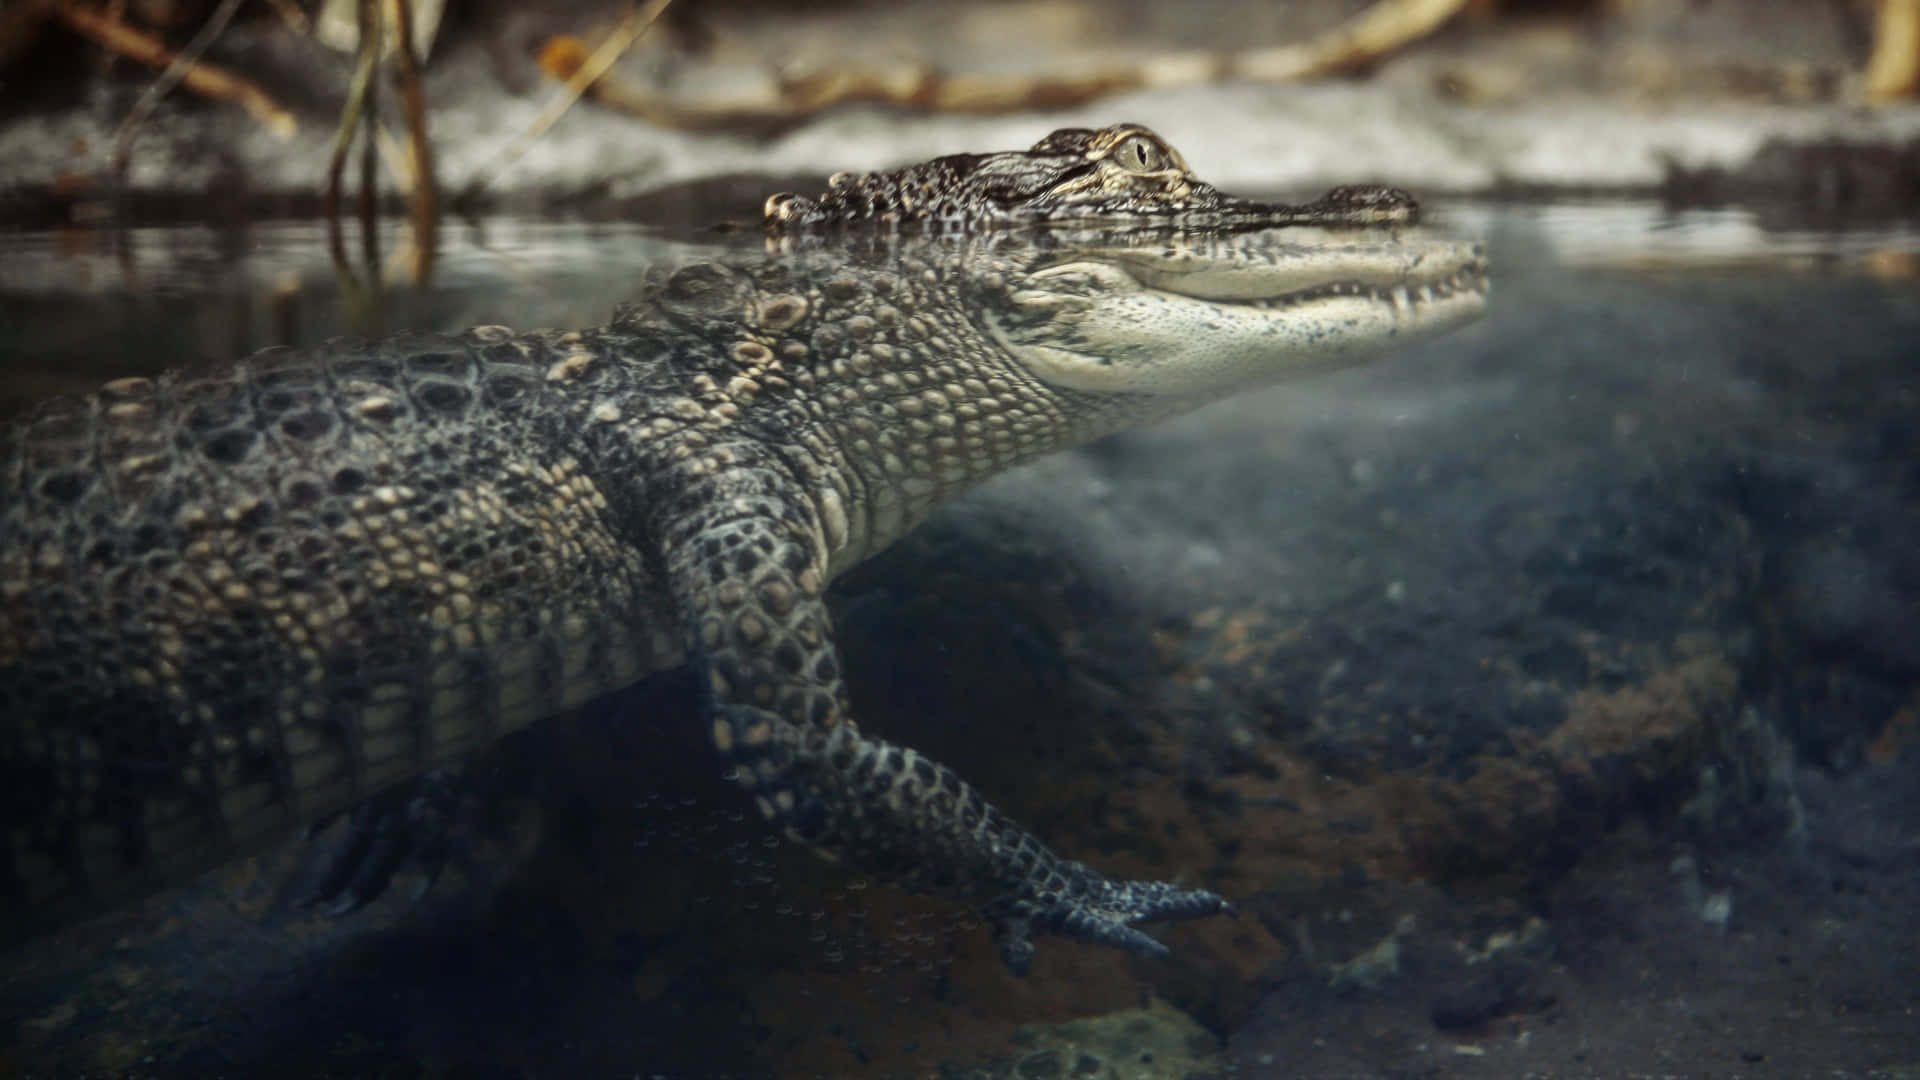 ____ A close-up of an alligator basking lazily in the warm, tropical sun